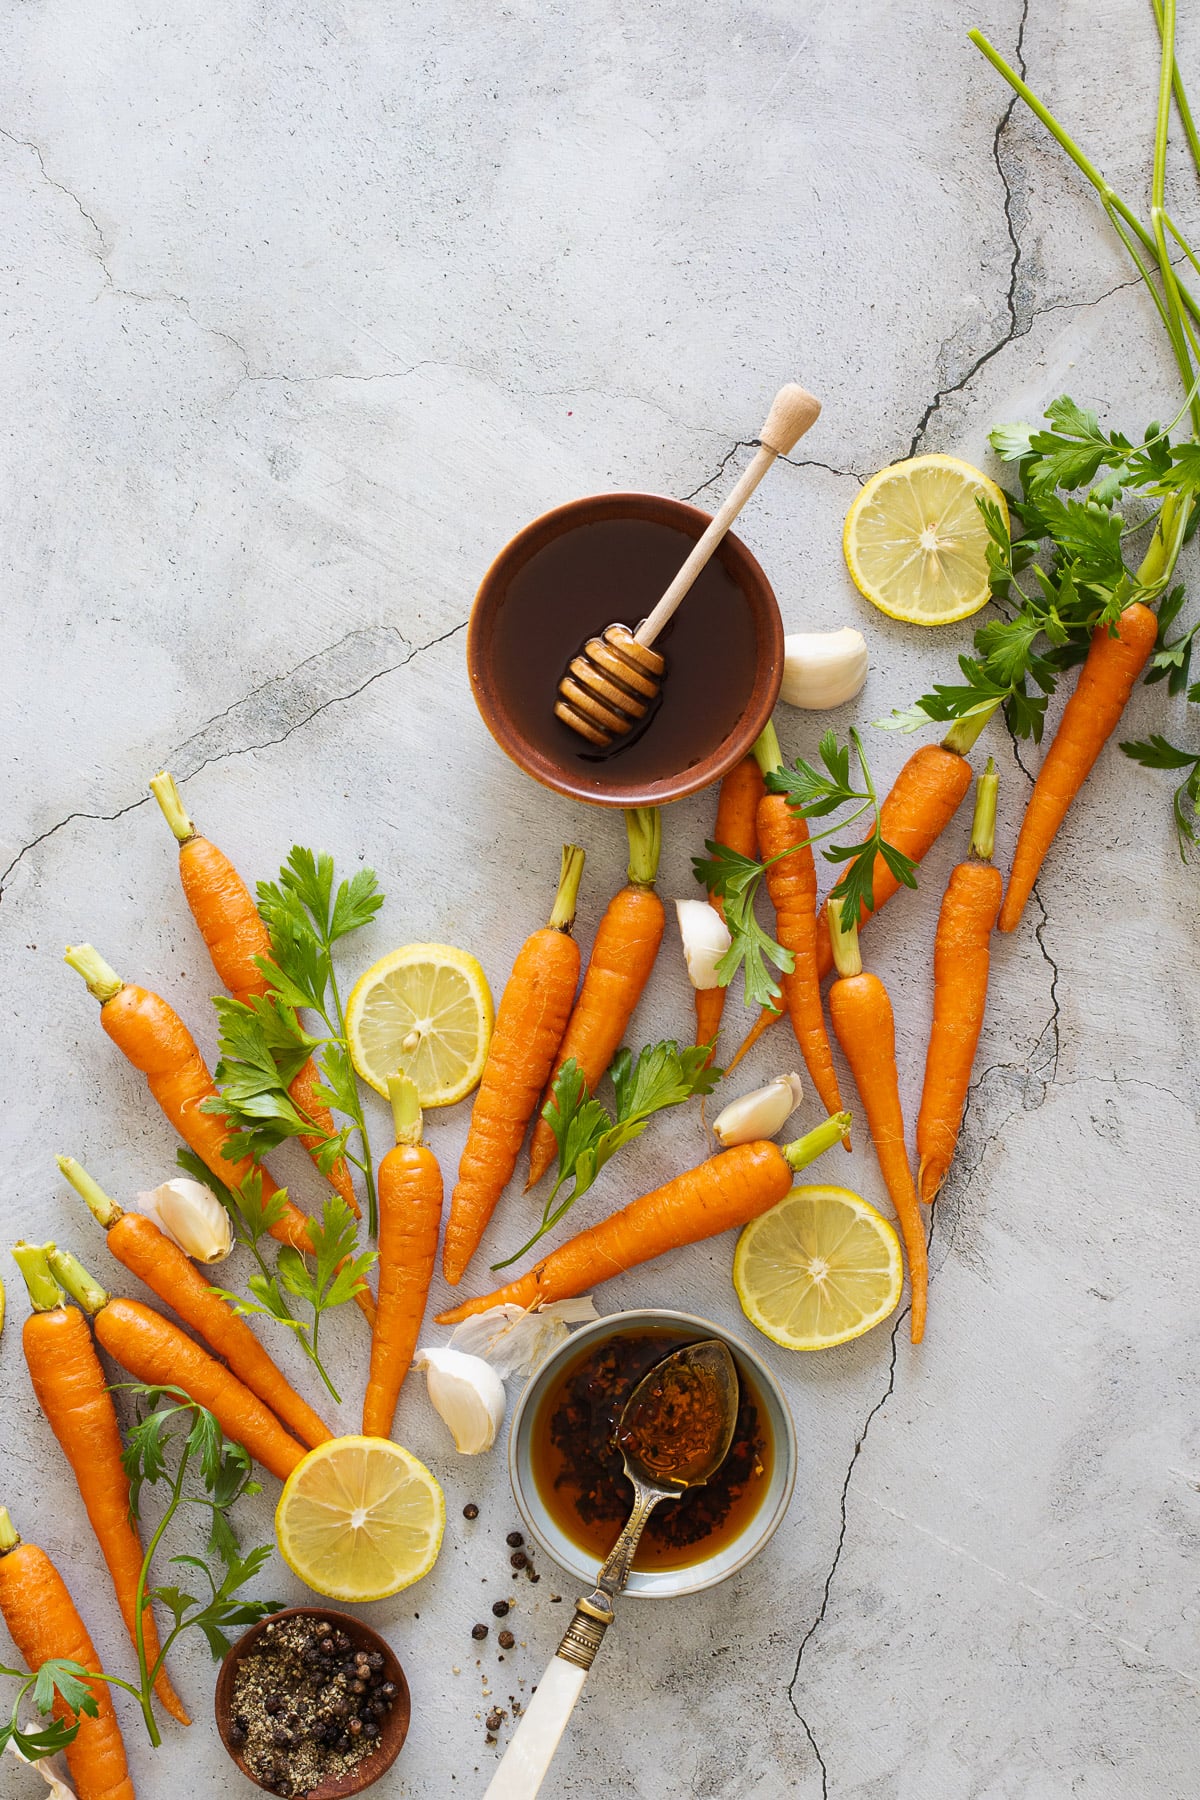 Carrots with lemons and herbs